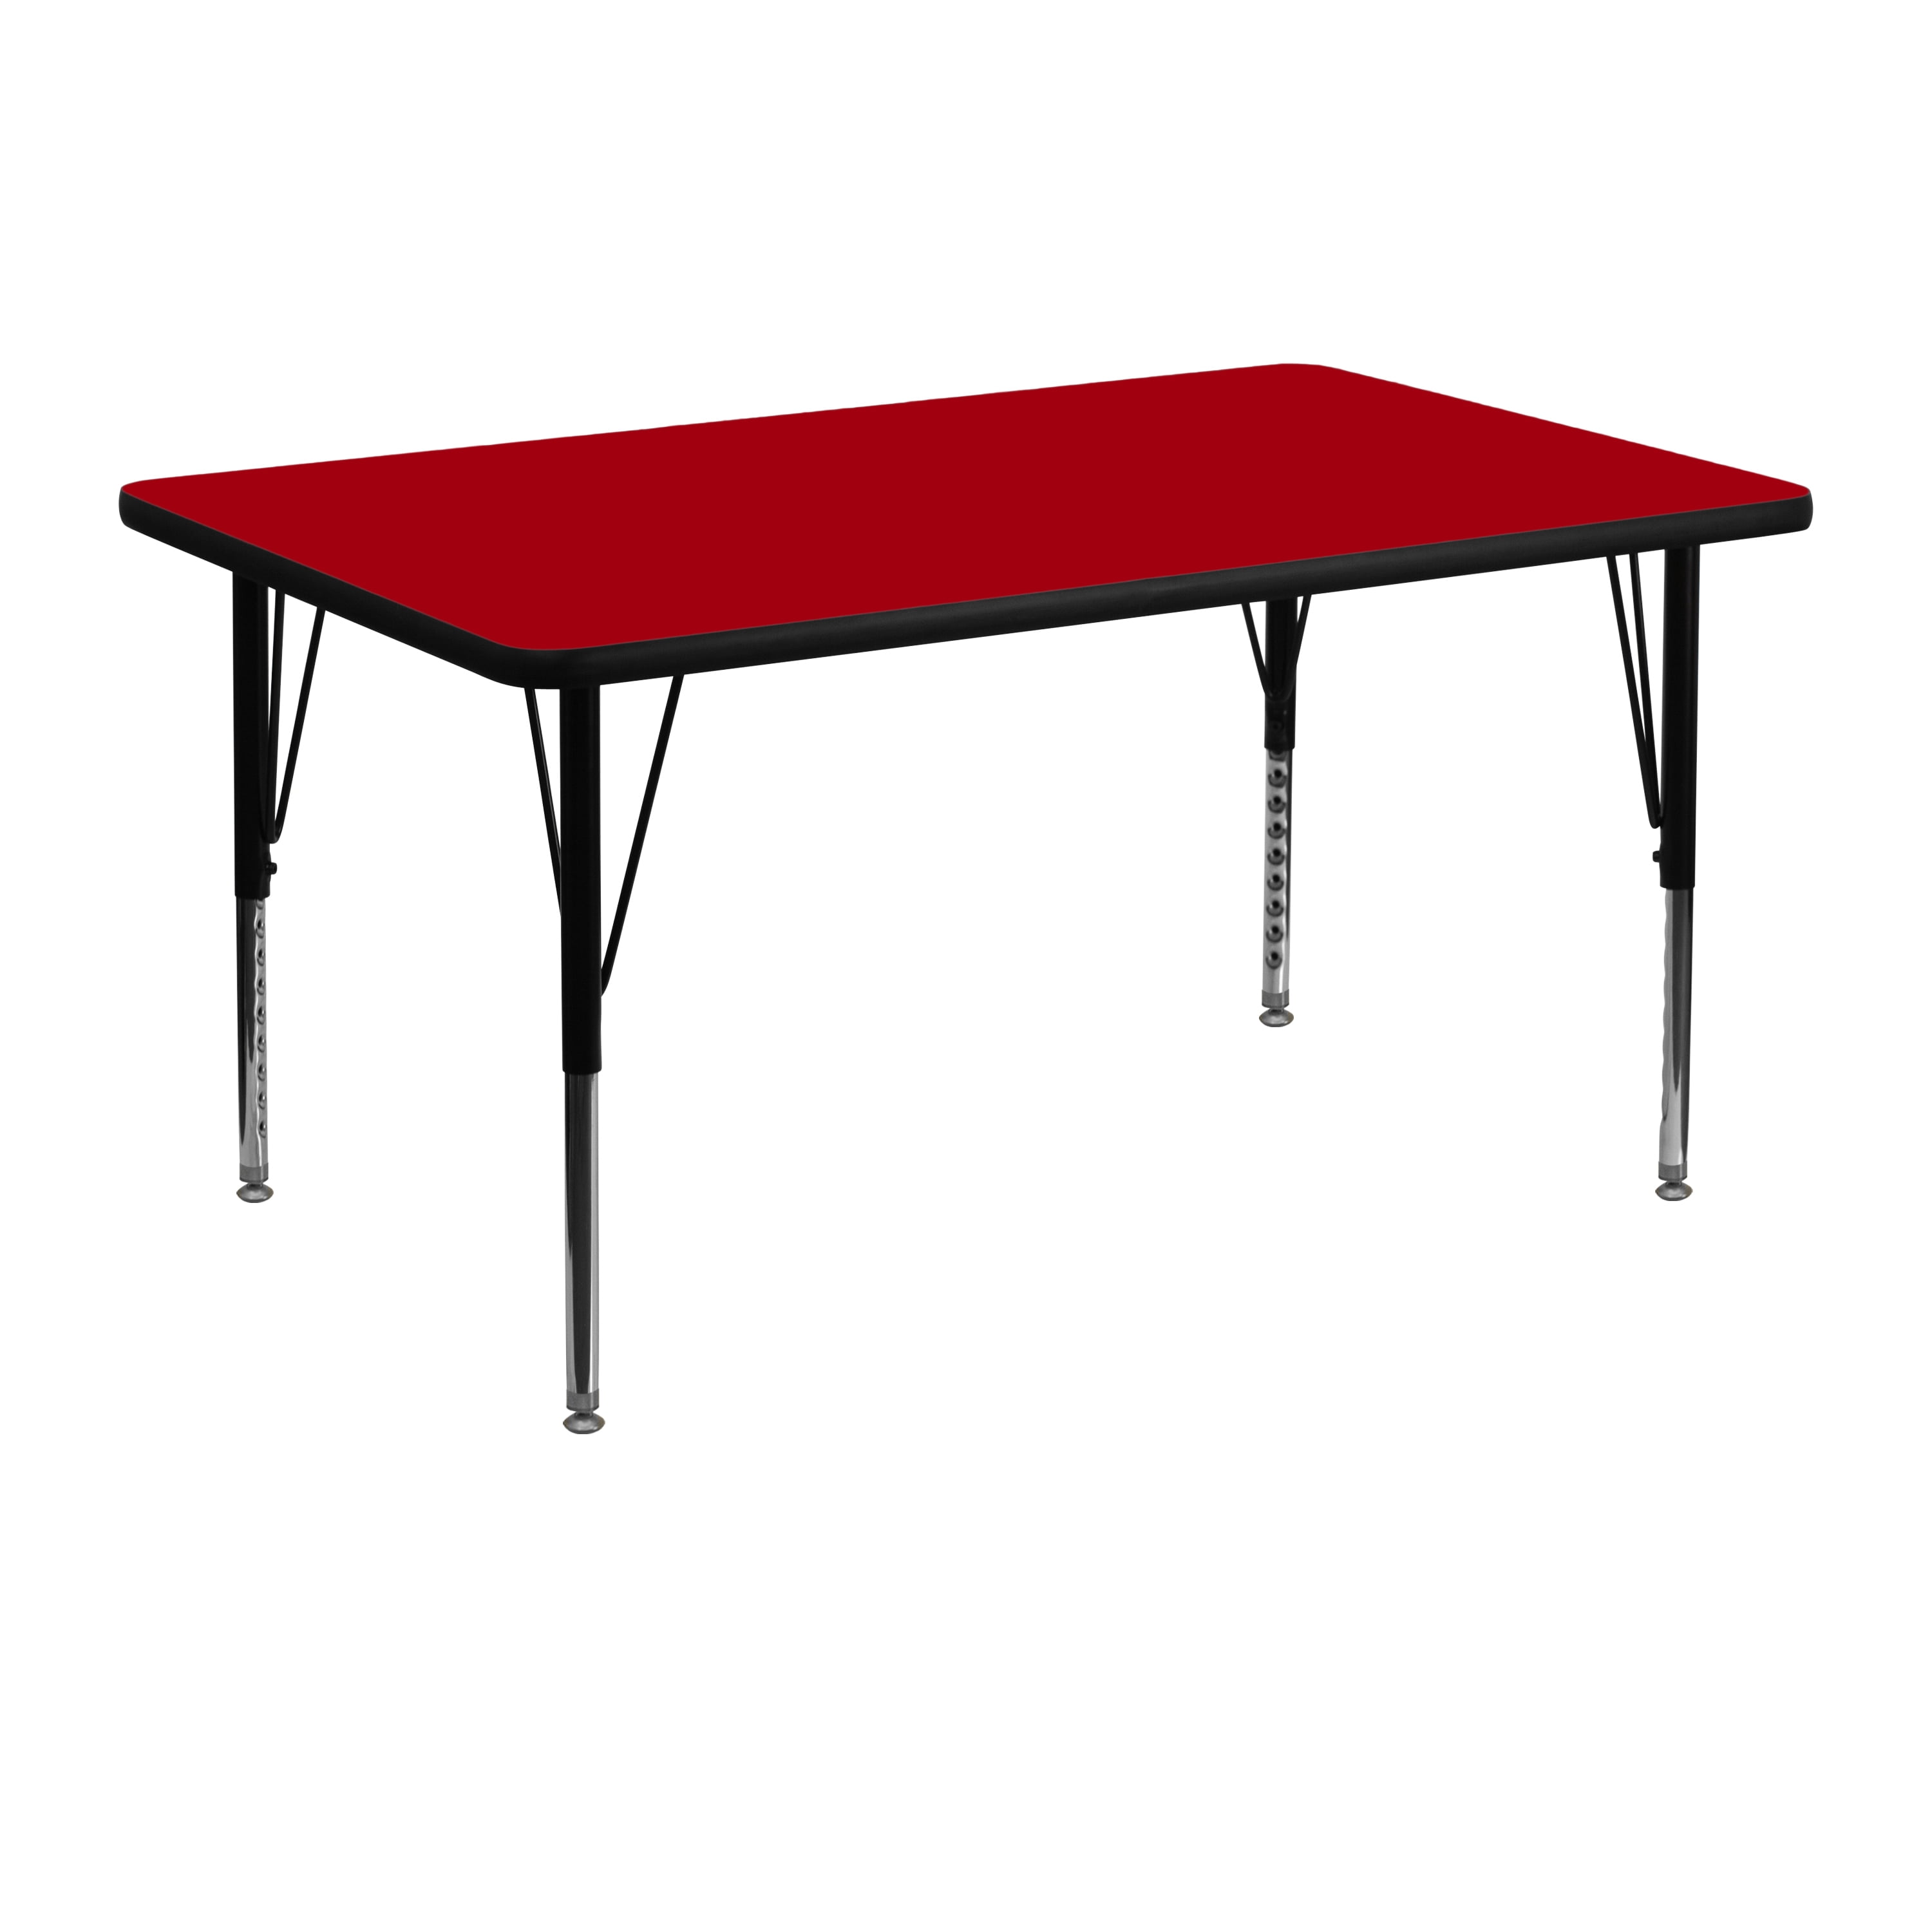 Details about   Mobile 48" Round Laminate Adjustable Preschool Activity Table 